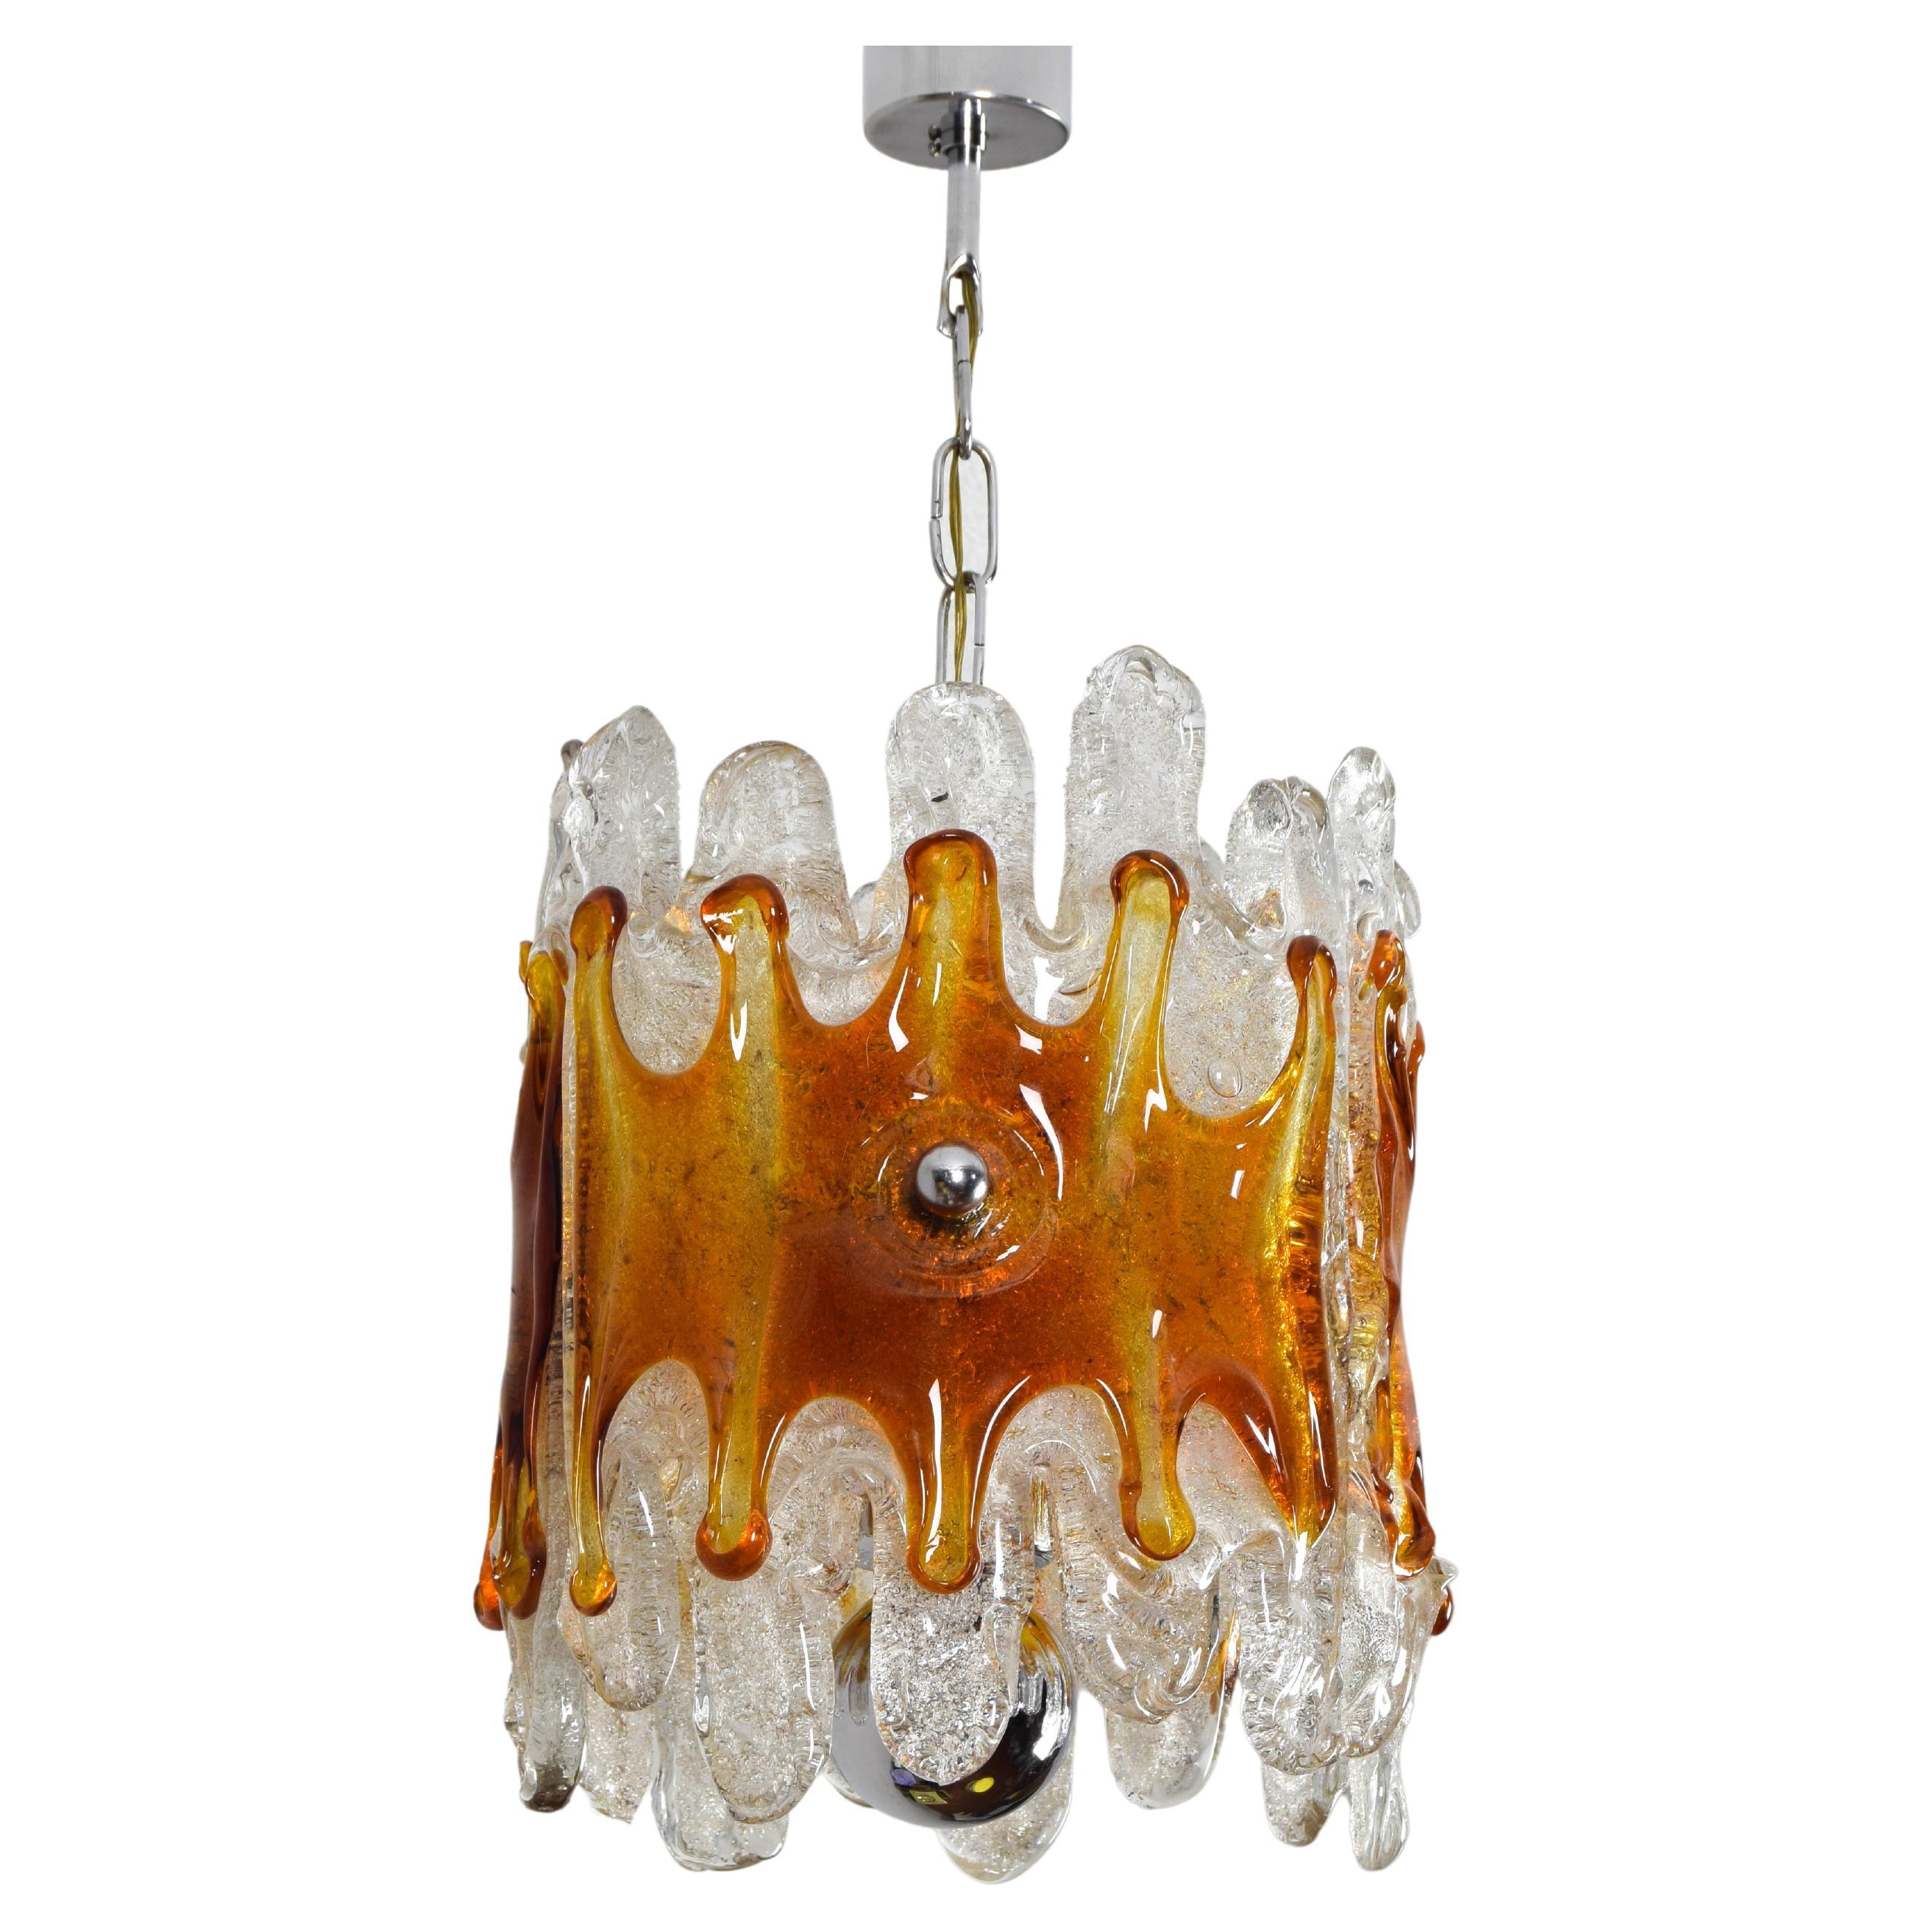 Midcentury Italian Modern Mazzega Amber and Clear Lava Murano Chandelier, 1960s For Sale